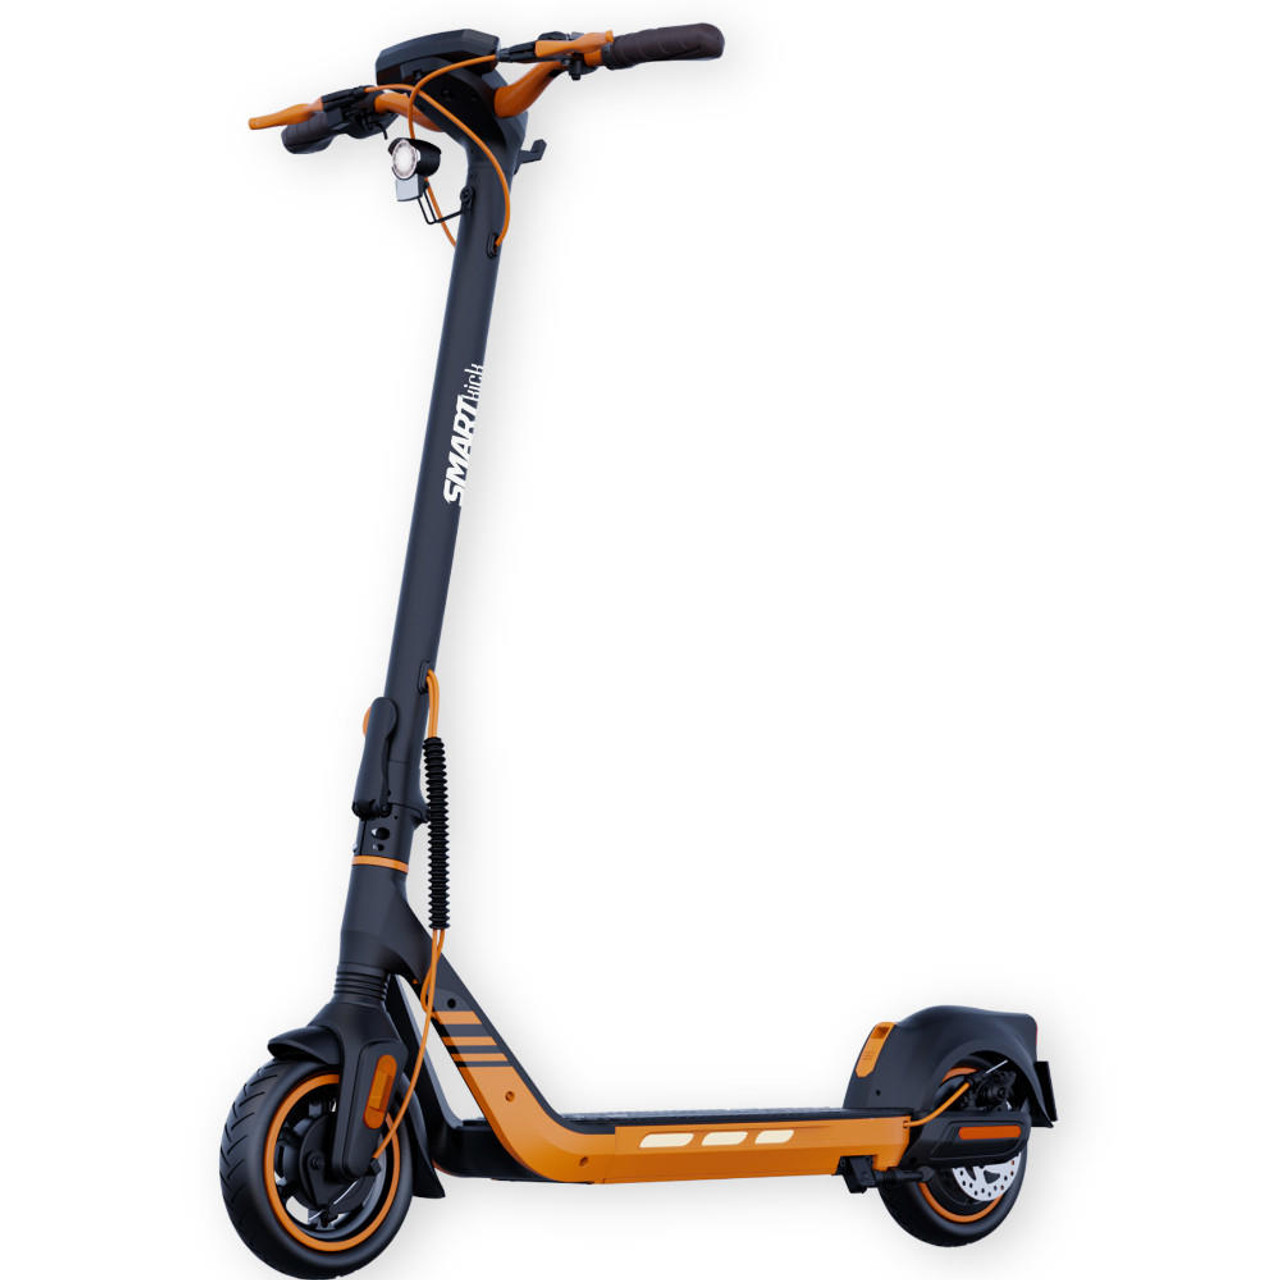 Smartkick N4 500W Foldable Electric Scooter